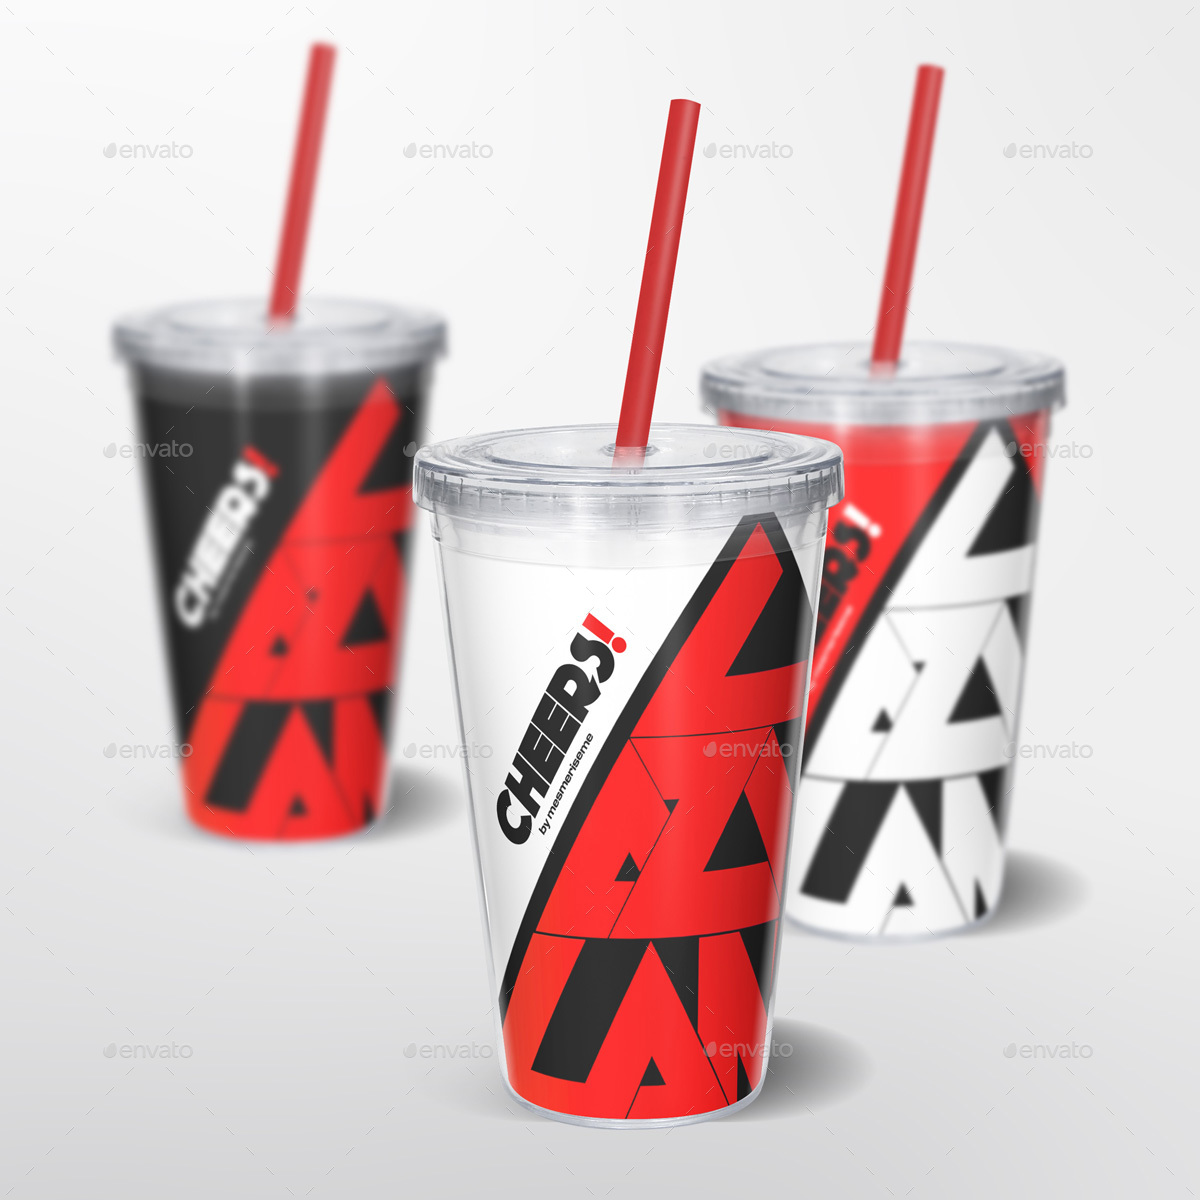 Download Acrylic Tumbler Mock-up by mesmeriseme_pro | GraphicRiver